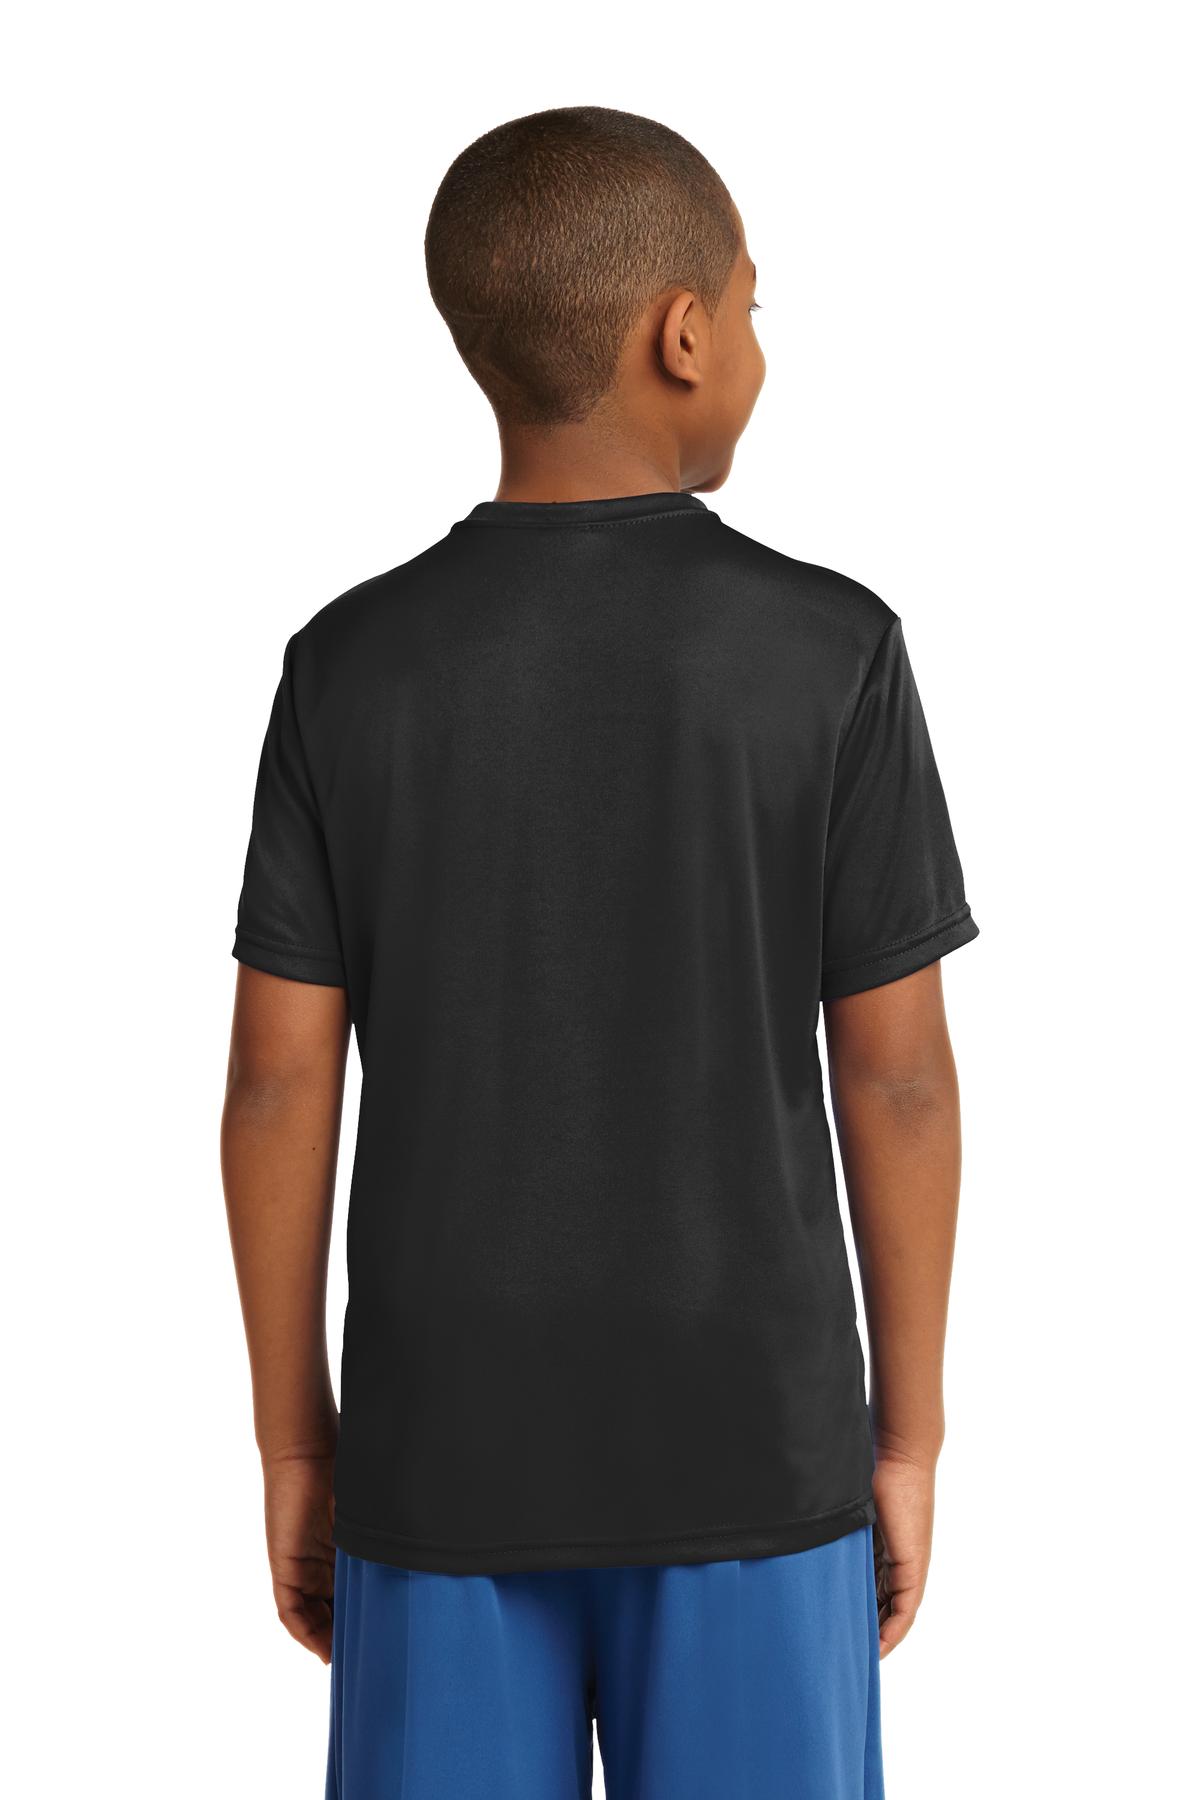 Sport-Tek® Youth PosiCharge® Competitor™ Tee. YST350 [Black] - DFW Impression